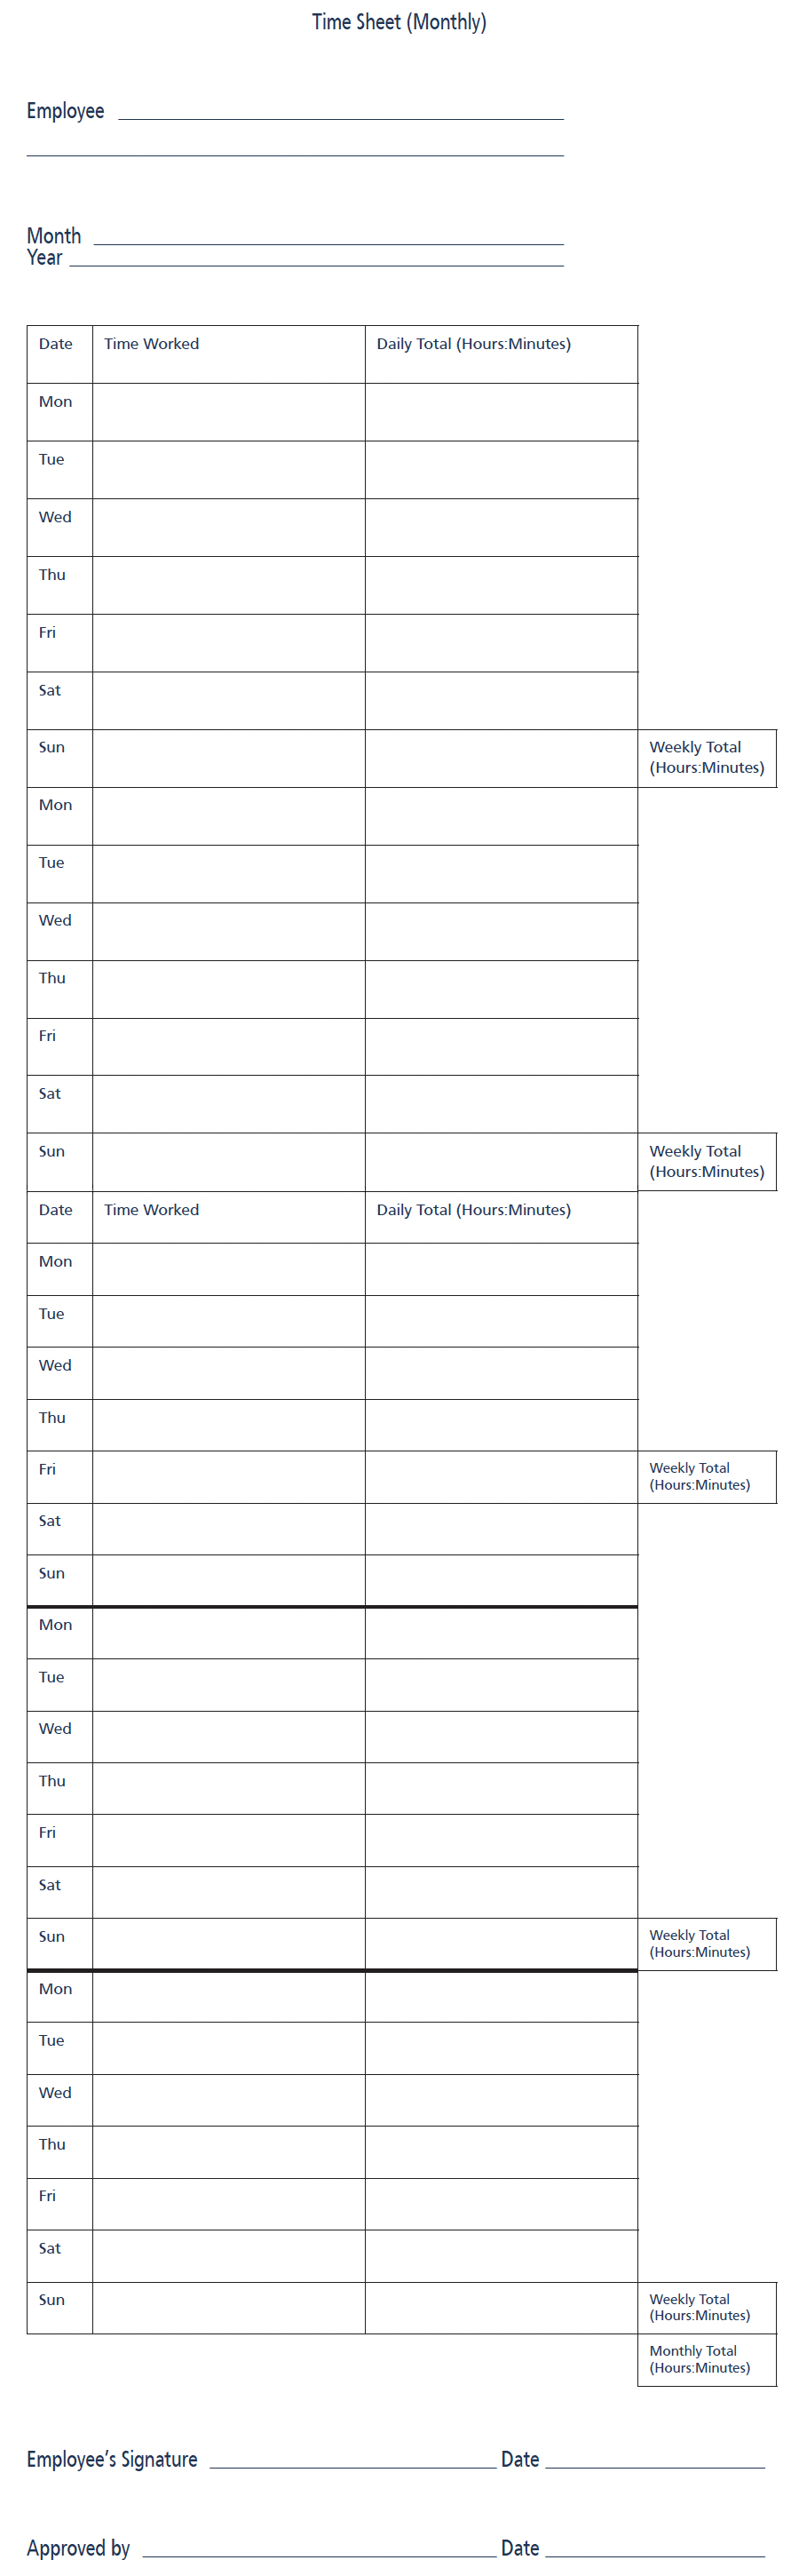 Appendix 1 template - Example Timesheets for workers and employers (monthly).